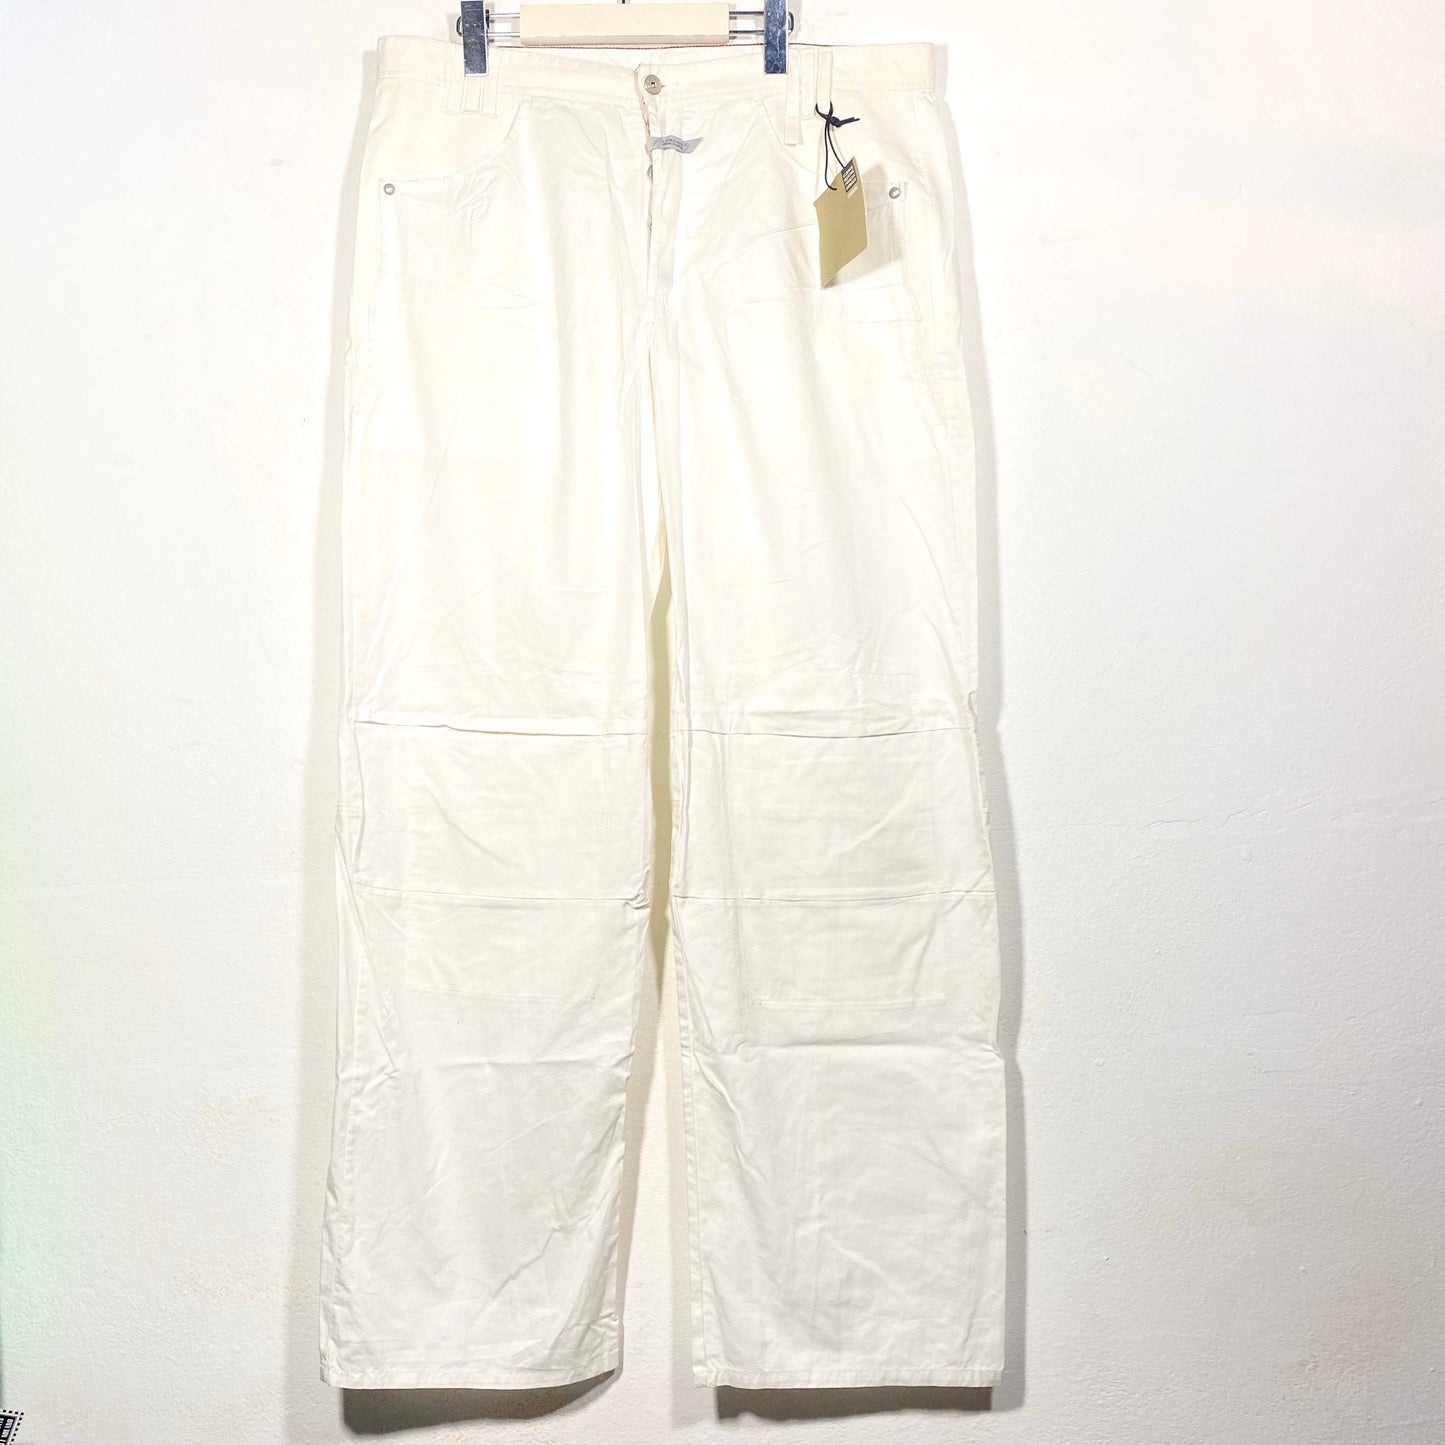 Marithe F. Girbaud 90s NWT white cotton trousers, cool pattern with denim waist and pockets and reinforced knees